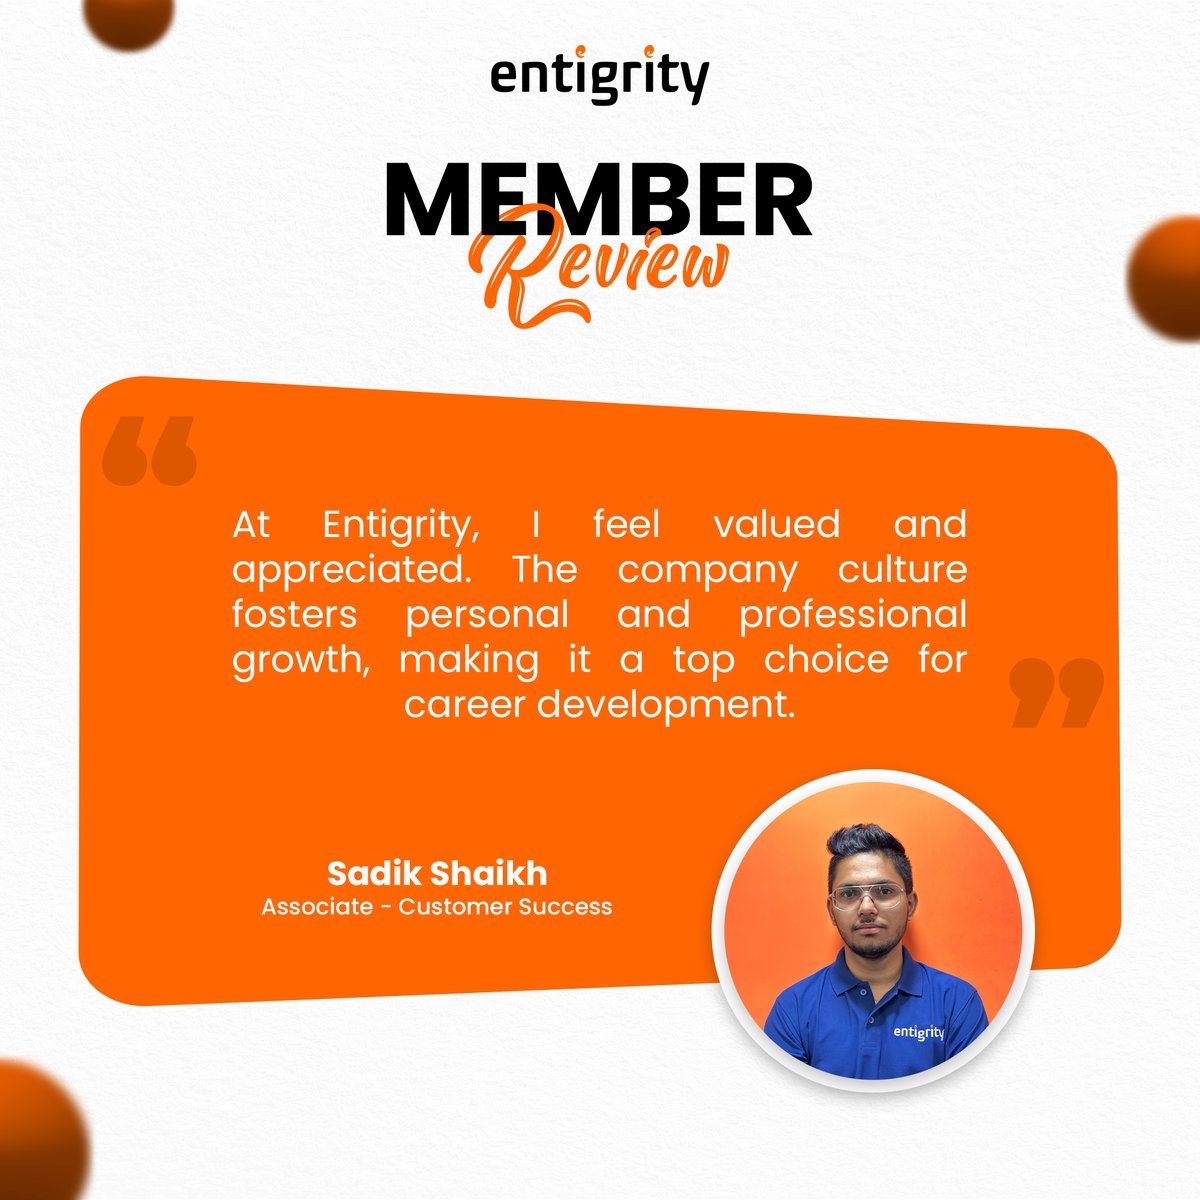 Discover why our employees love Entigrity! We are happy to share their words. At Entigrity, experience a culture that values your growth and success. #Entigrity #EmployeeExperience #CareerGrowth